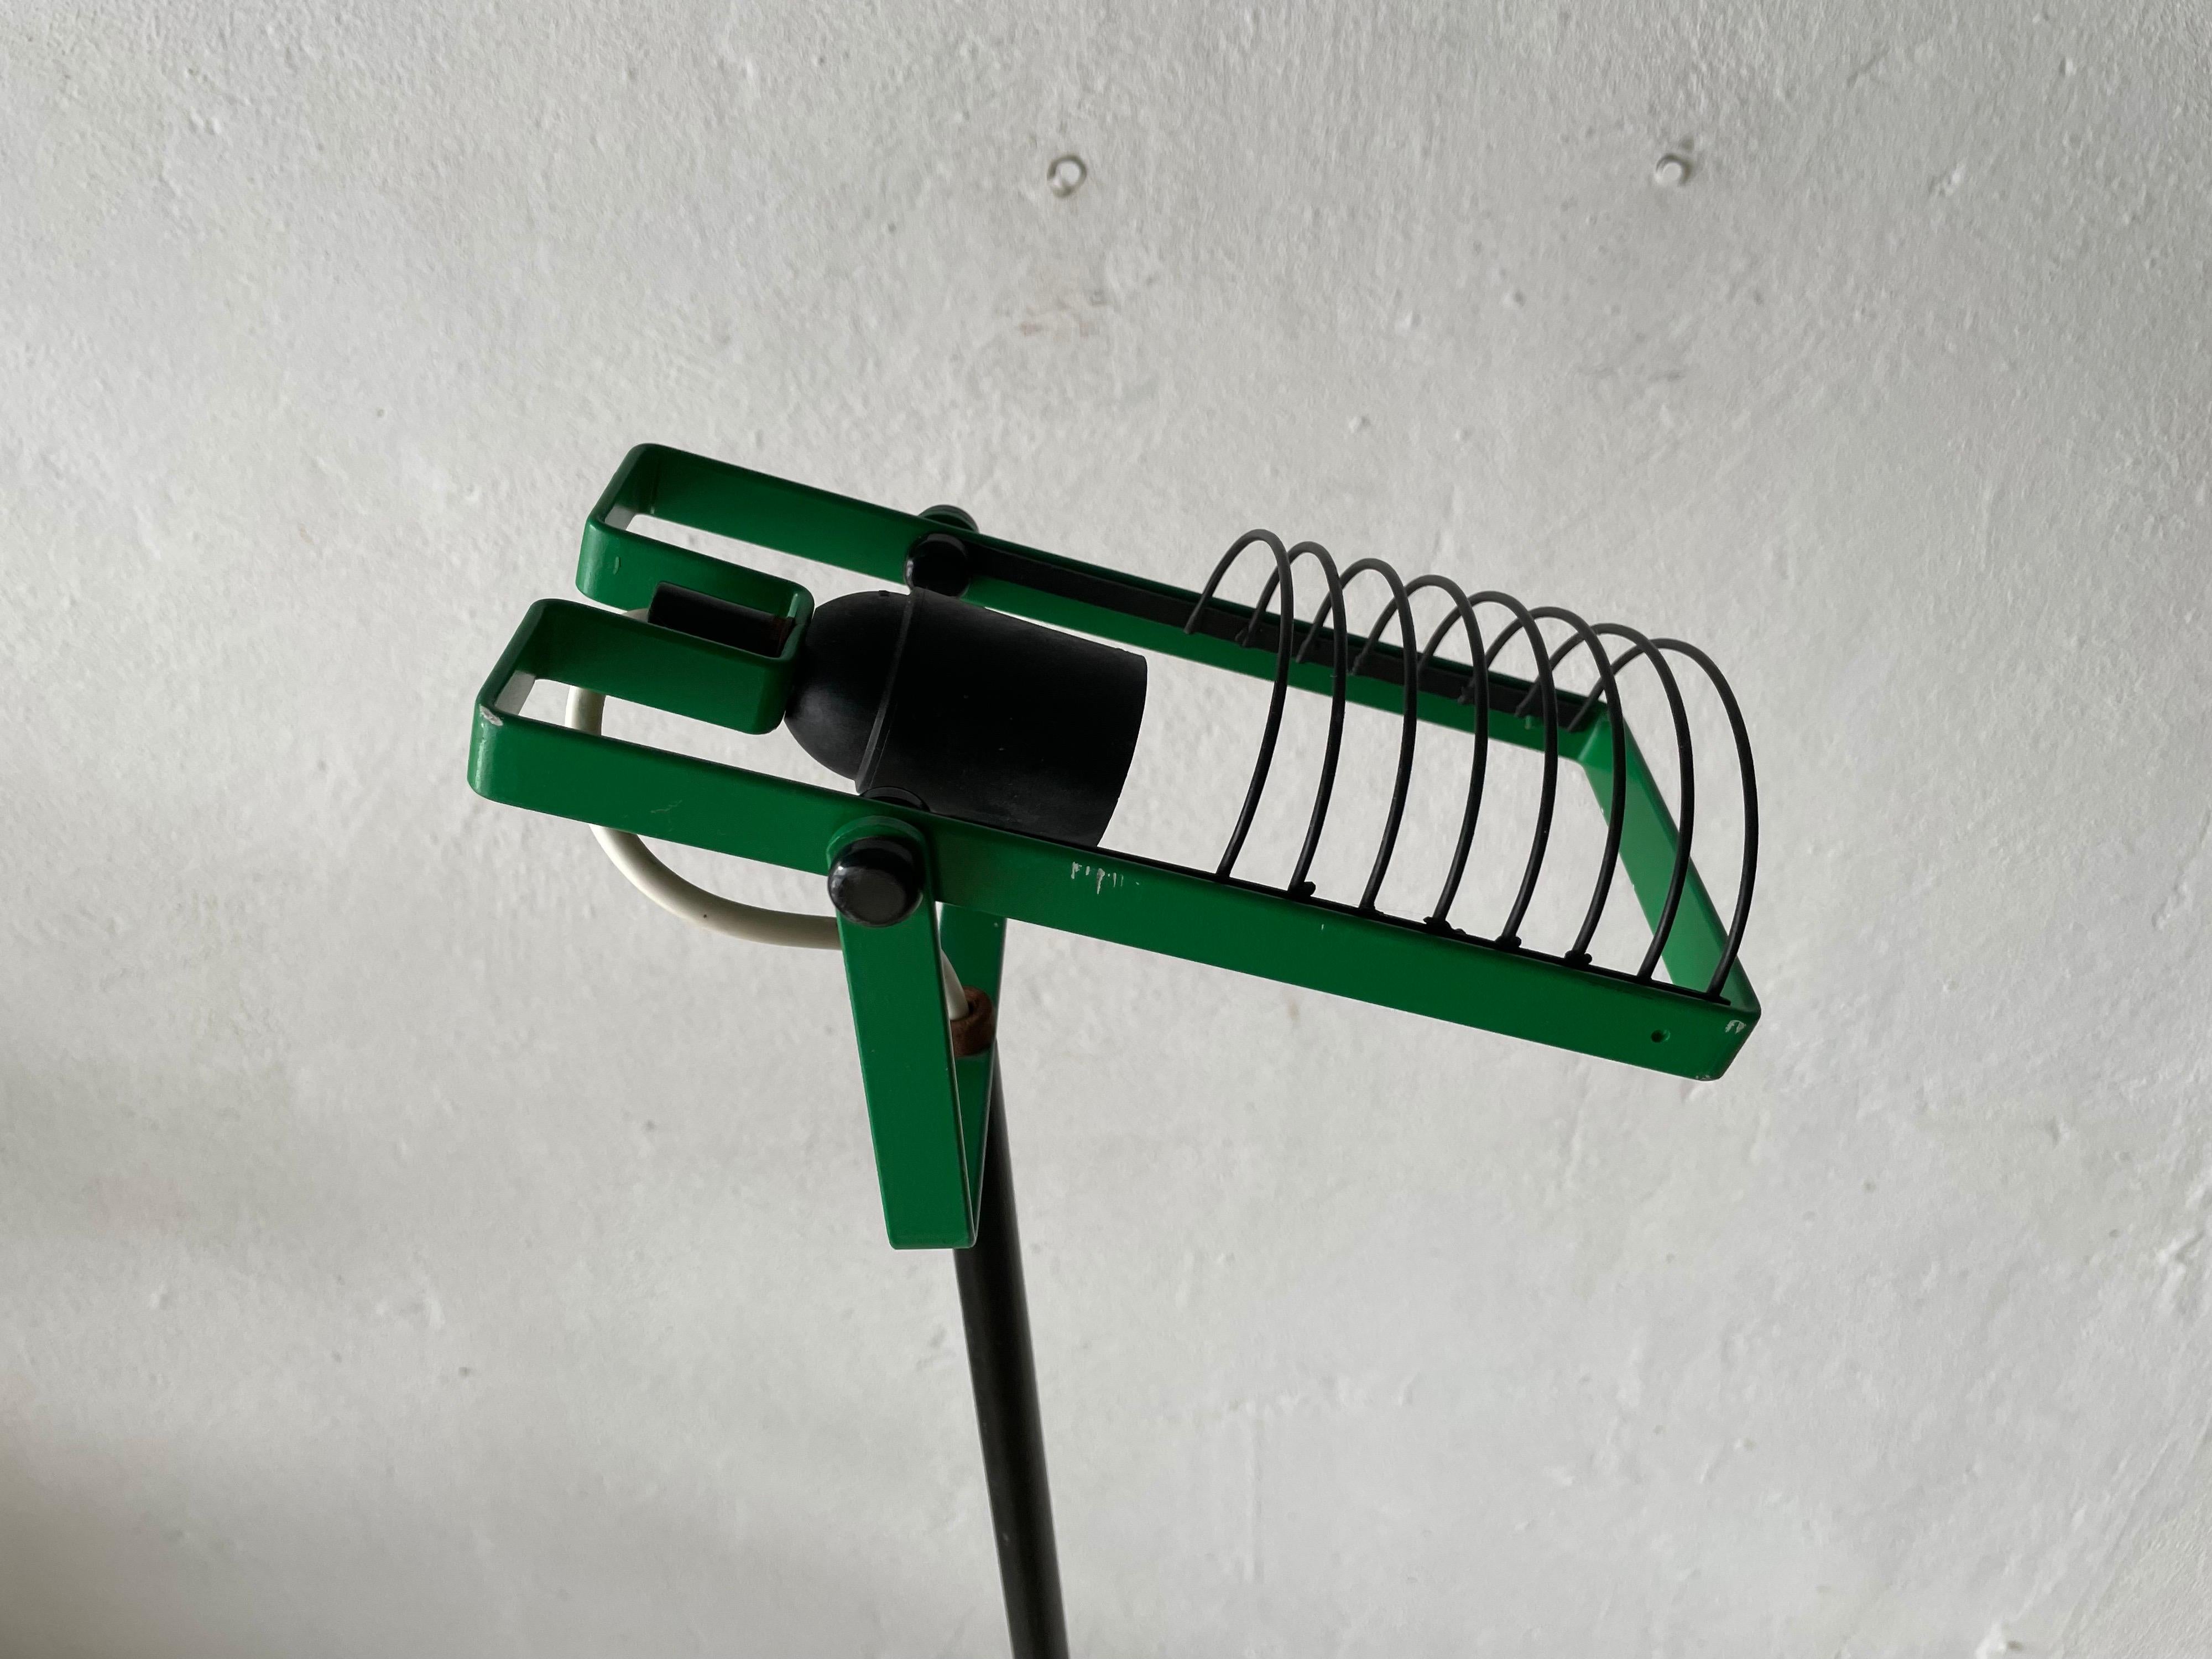 Rare green floor lamp by Ernesto Gismondi for Artemide, 1970s, Italy

Lamp is in very good vintage condition.

This lamp works with E27 light bulb. Max 100W
Wired and suitable to use with 220V and 110V for all